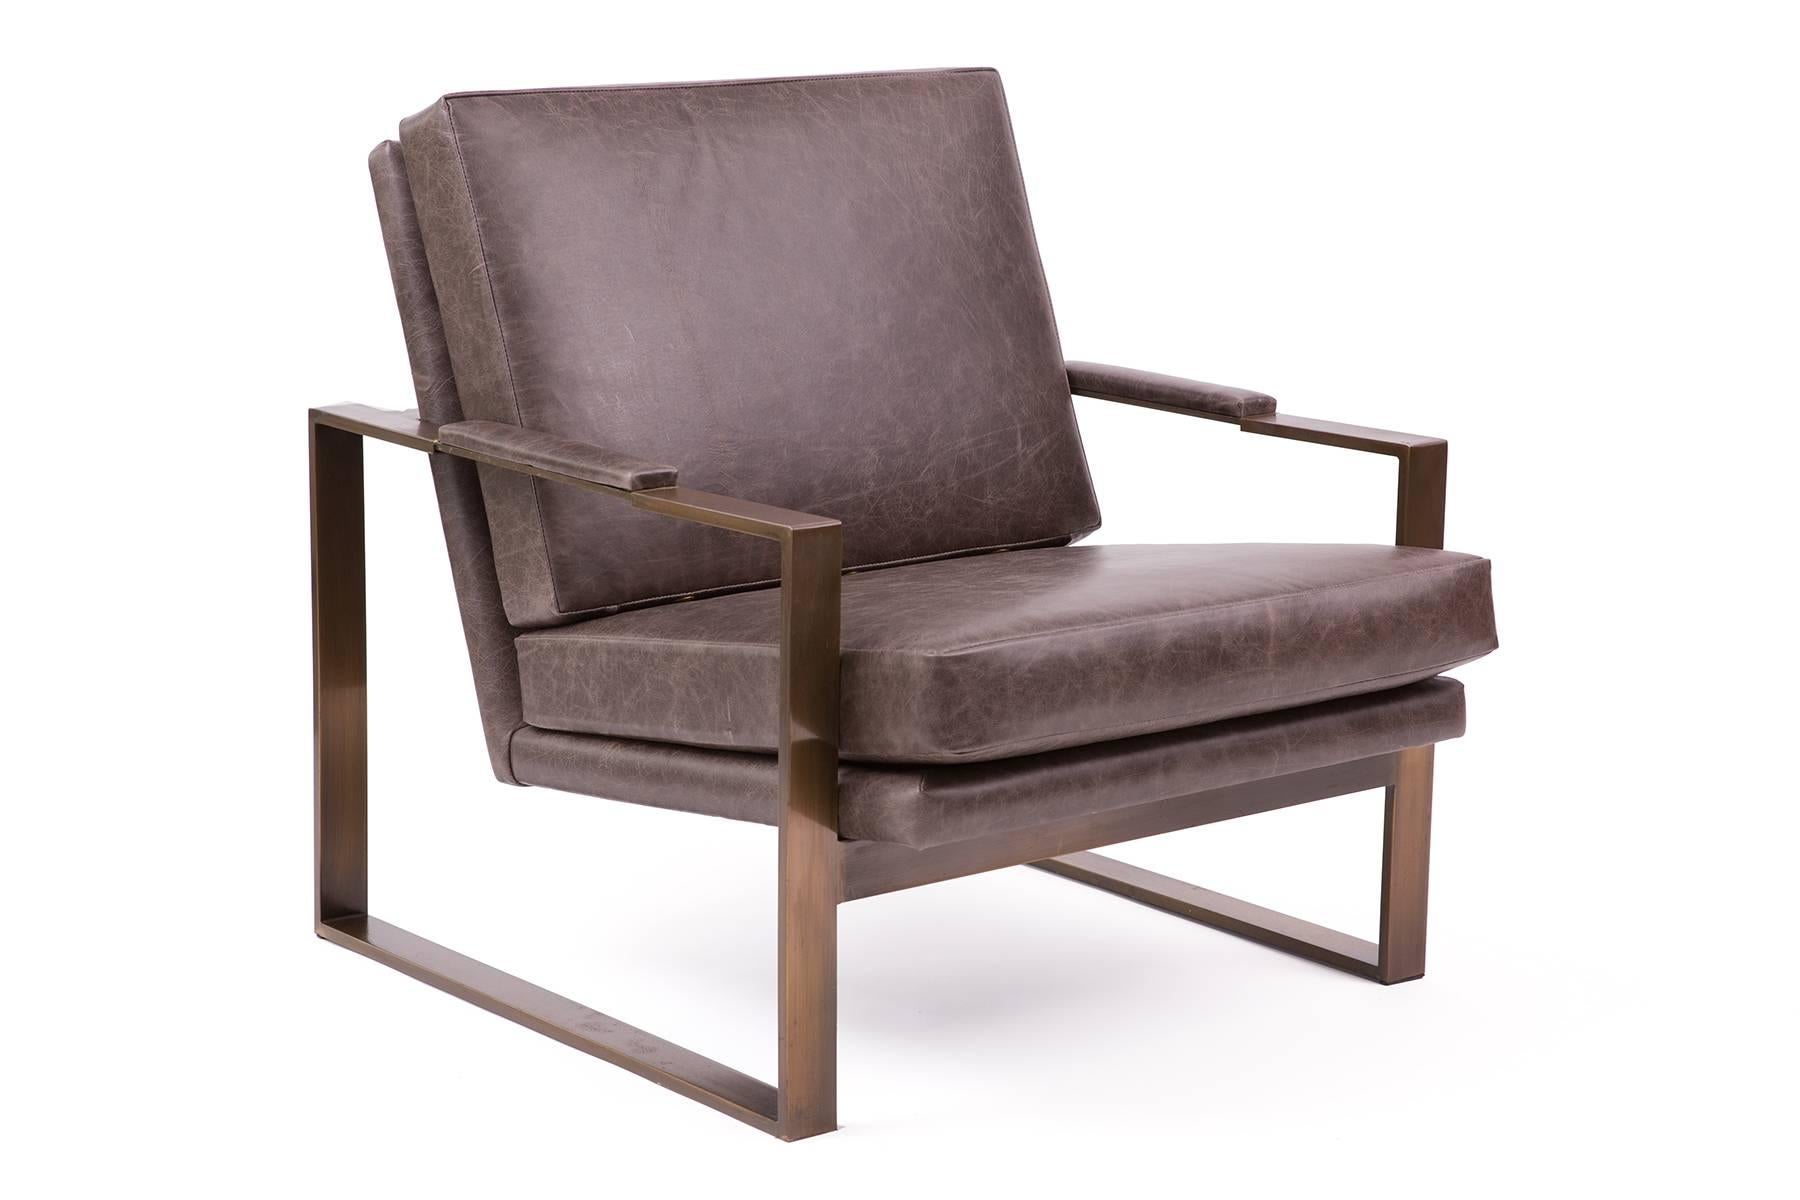 Milo Baughman for Thayer Coggin bronze and leather lounge chairs, circa early 1970s. These rare examples have patinated bronze frames and have been newly upholstered in a beautifully broken in and supple leather. Retain original label. Price listed